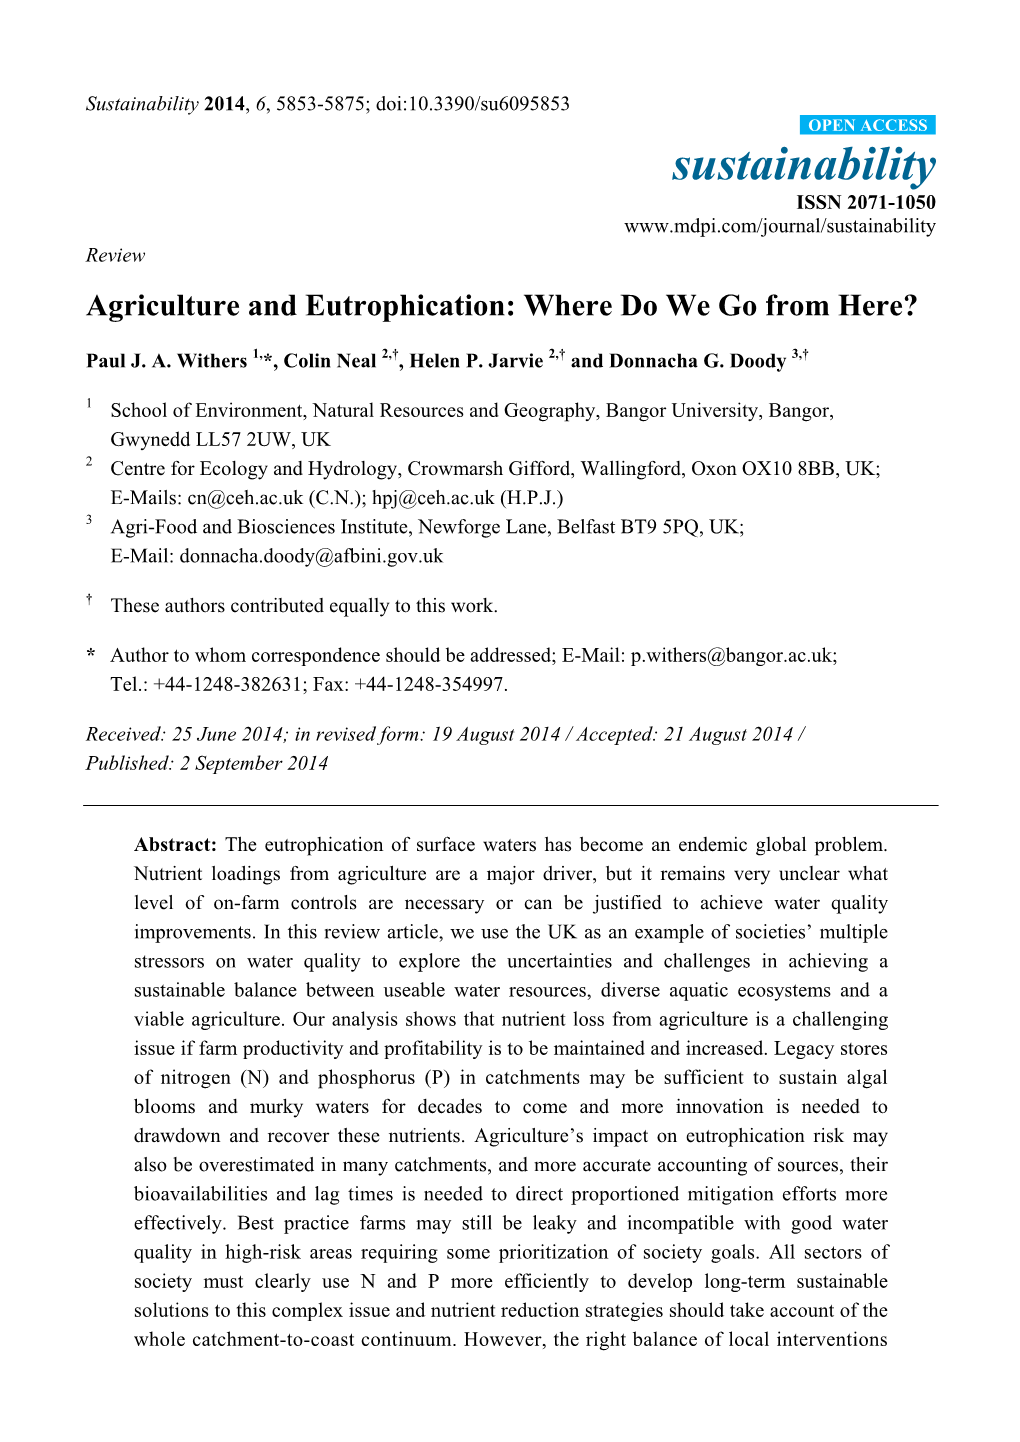 Agriculture and Eutrophication: Where Do We Go from Here?